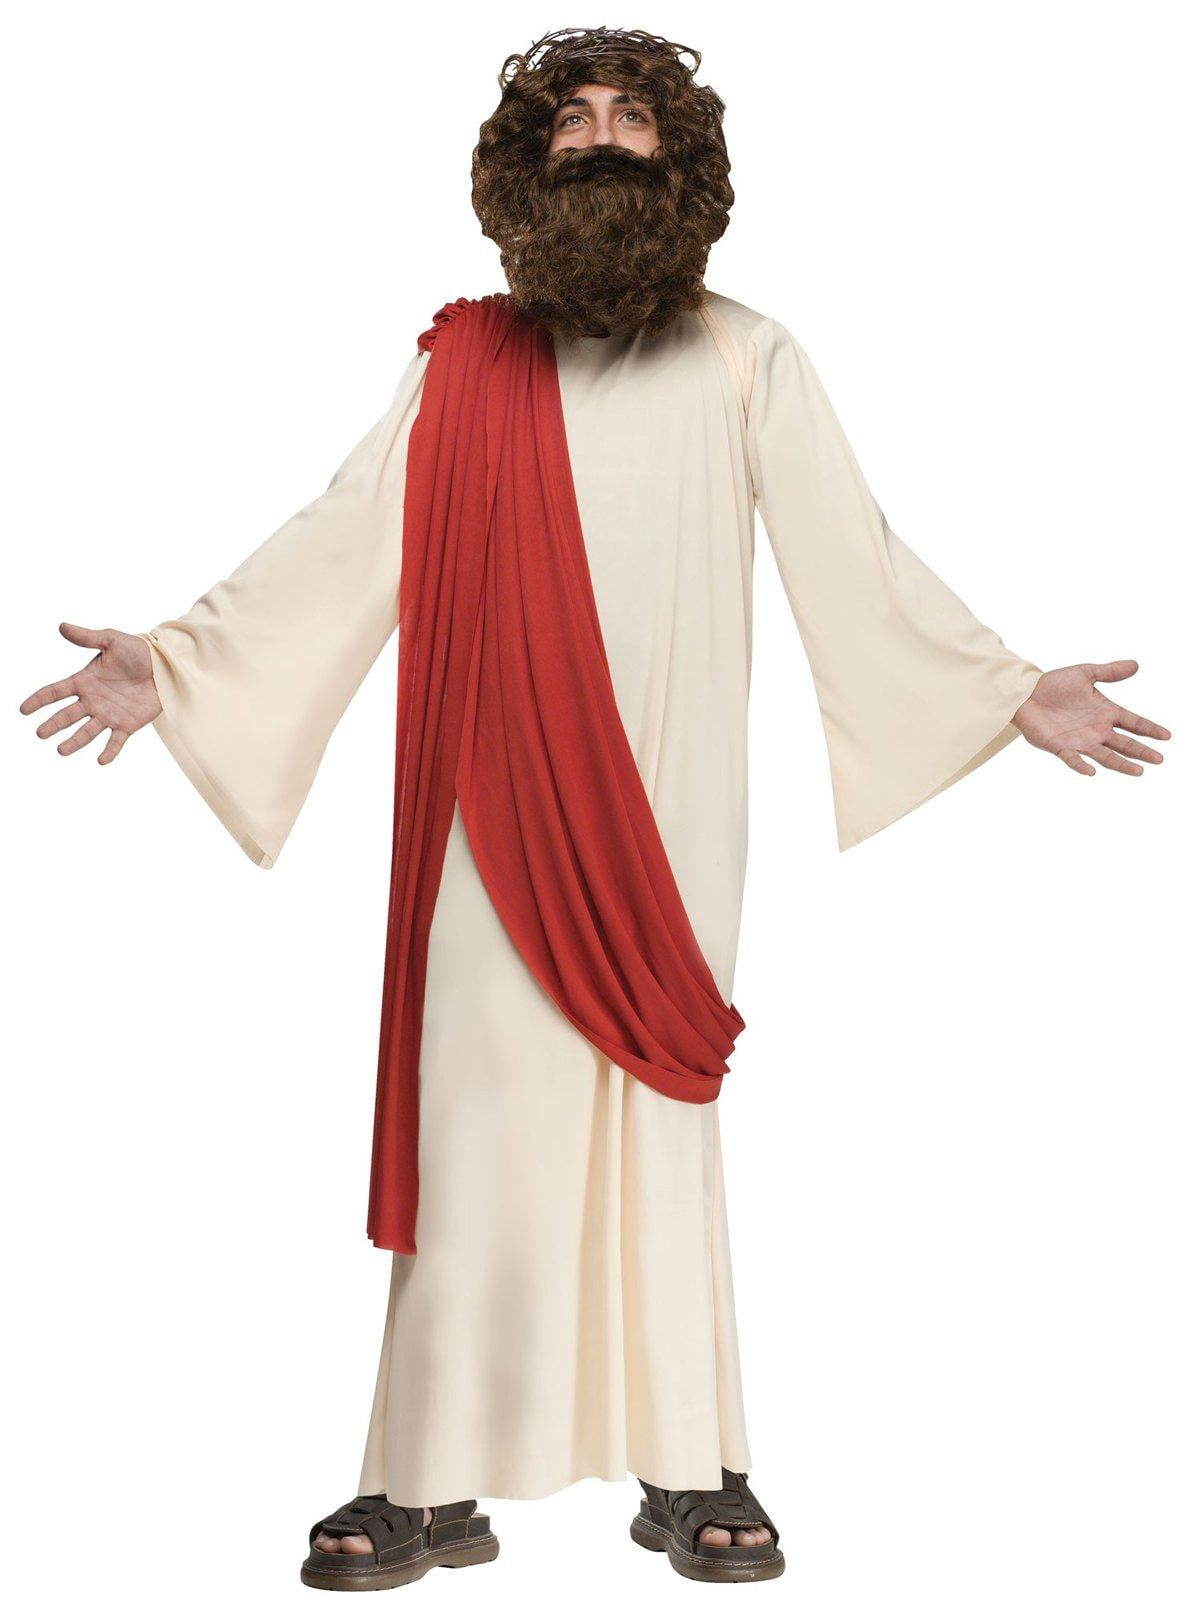 Details about   CK1935 Shepherd Religious Holy Easter Christmas Xmas Child Boys Biblical Costume 